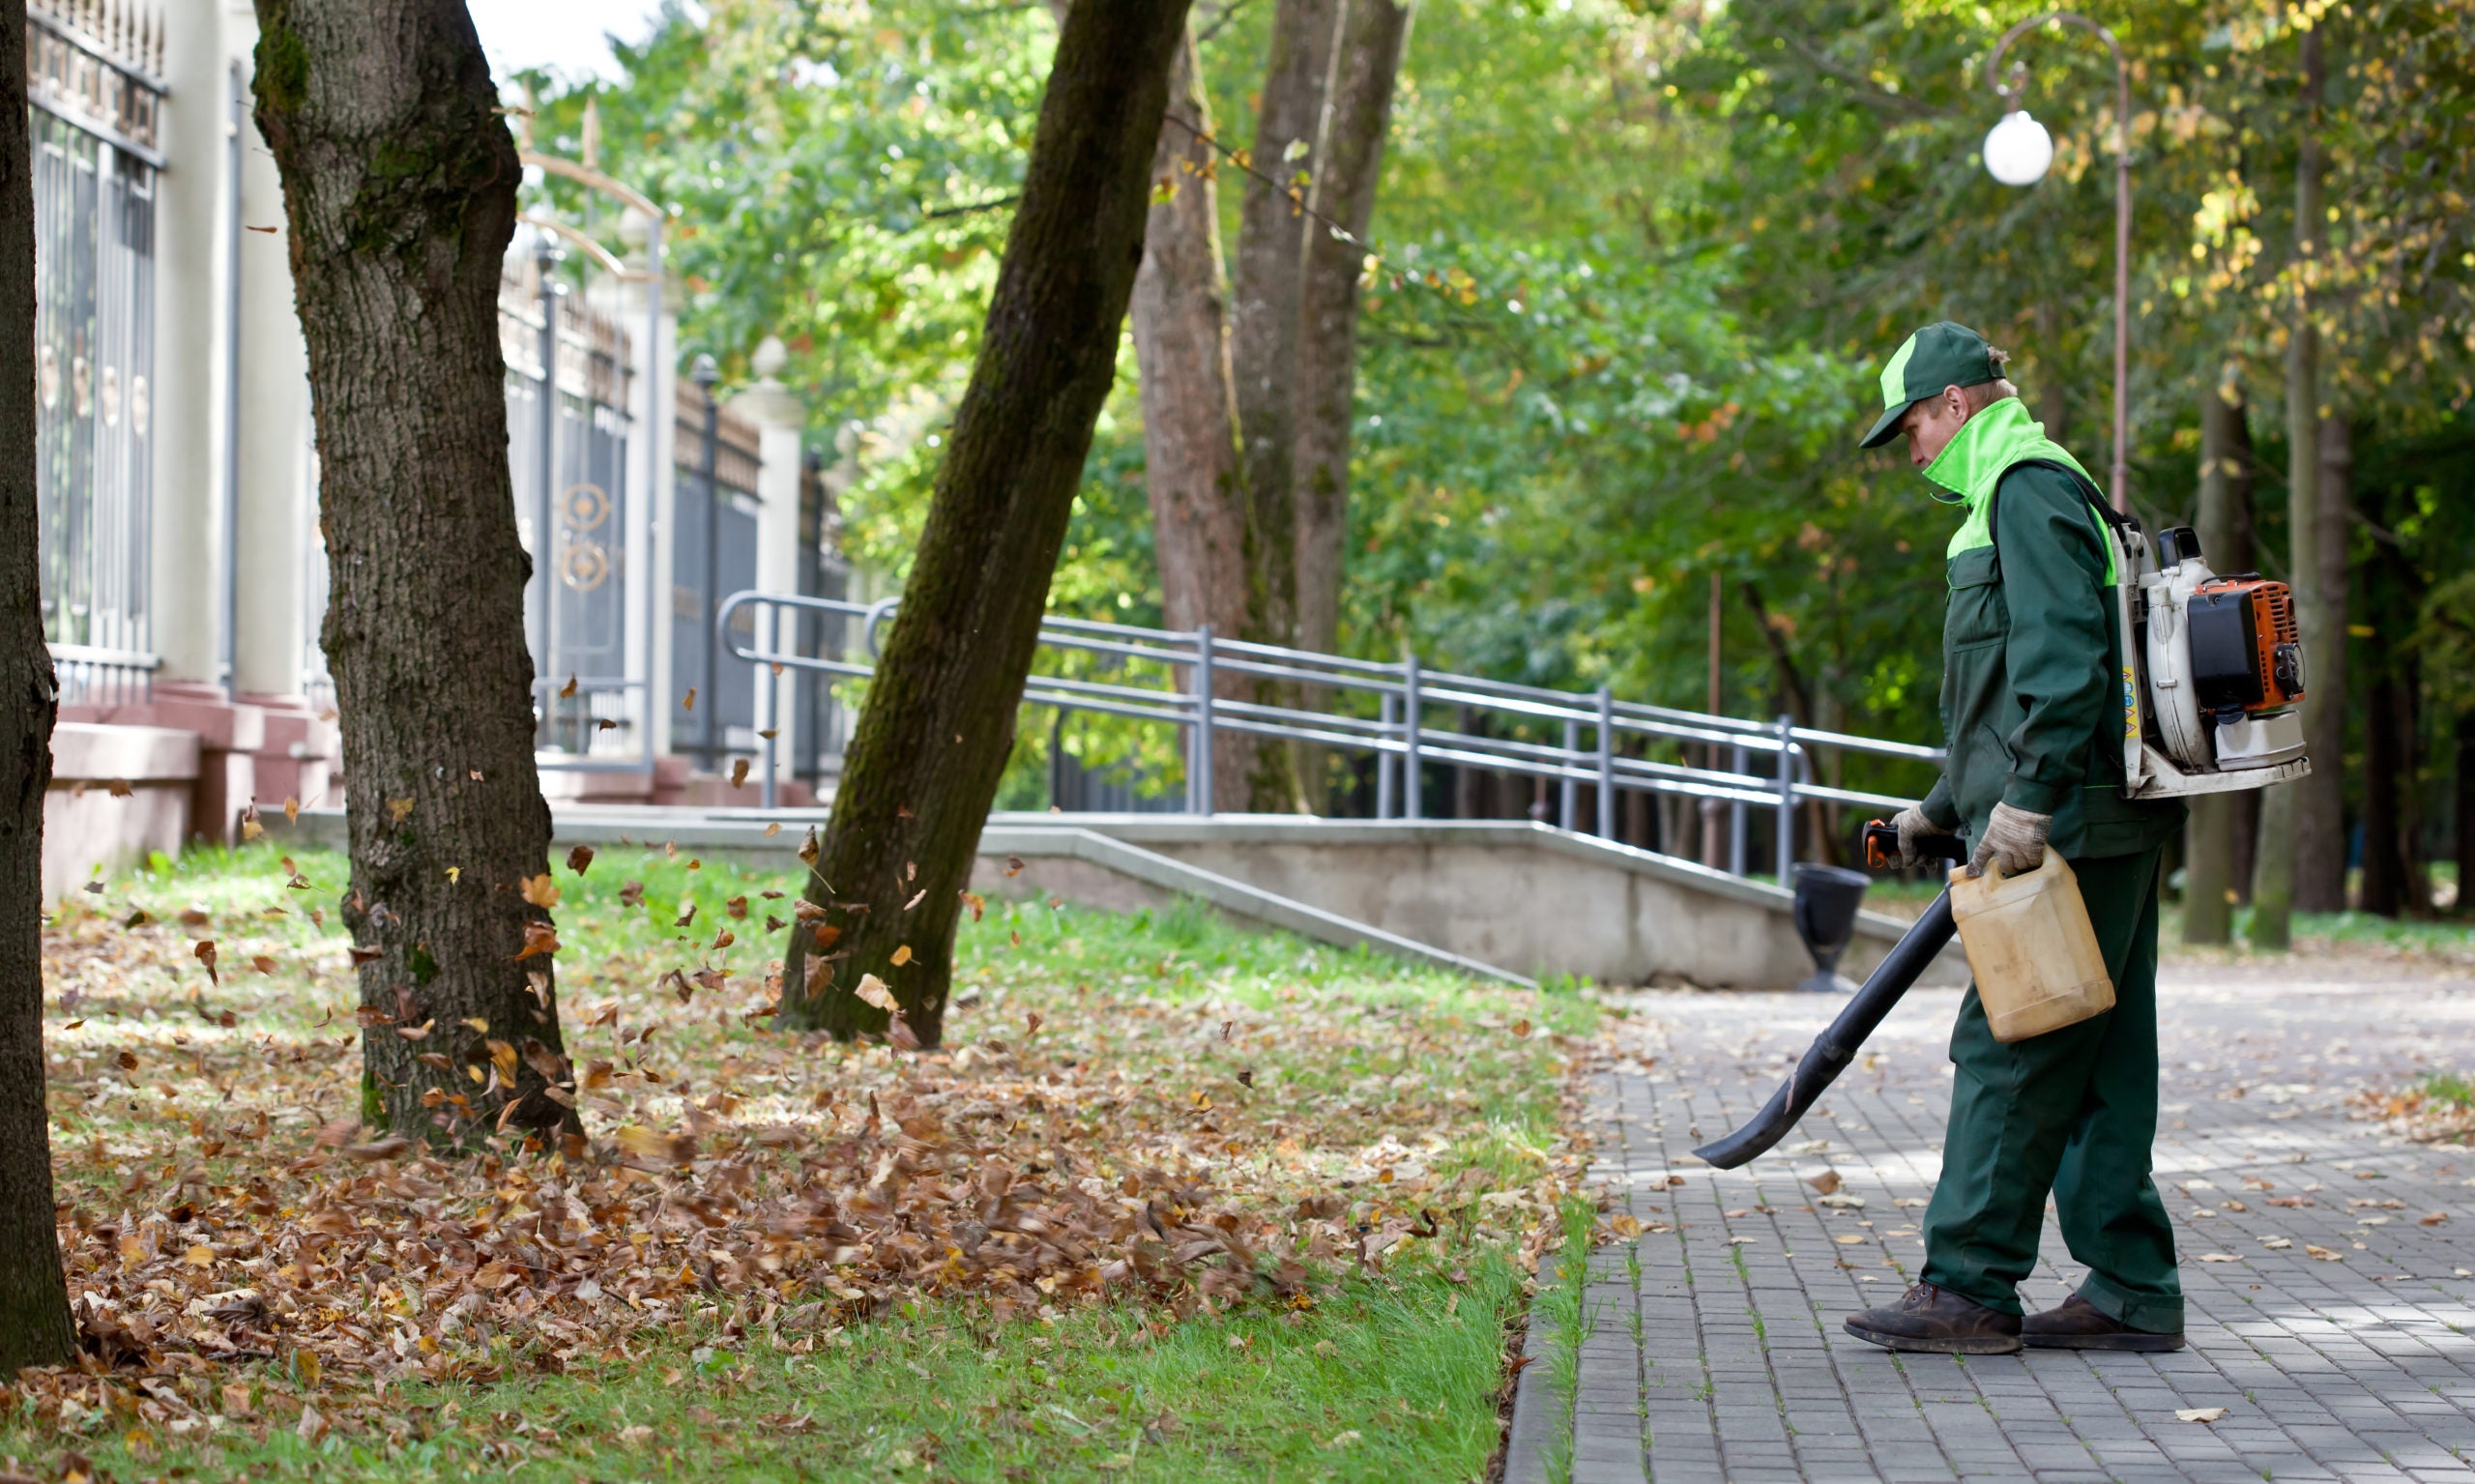 Ask the Gardener: The case against gas-powered leaf blowers